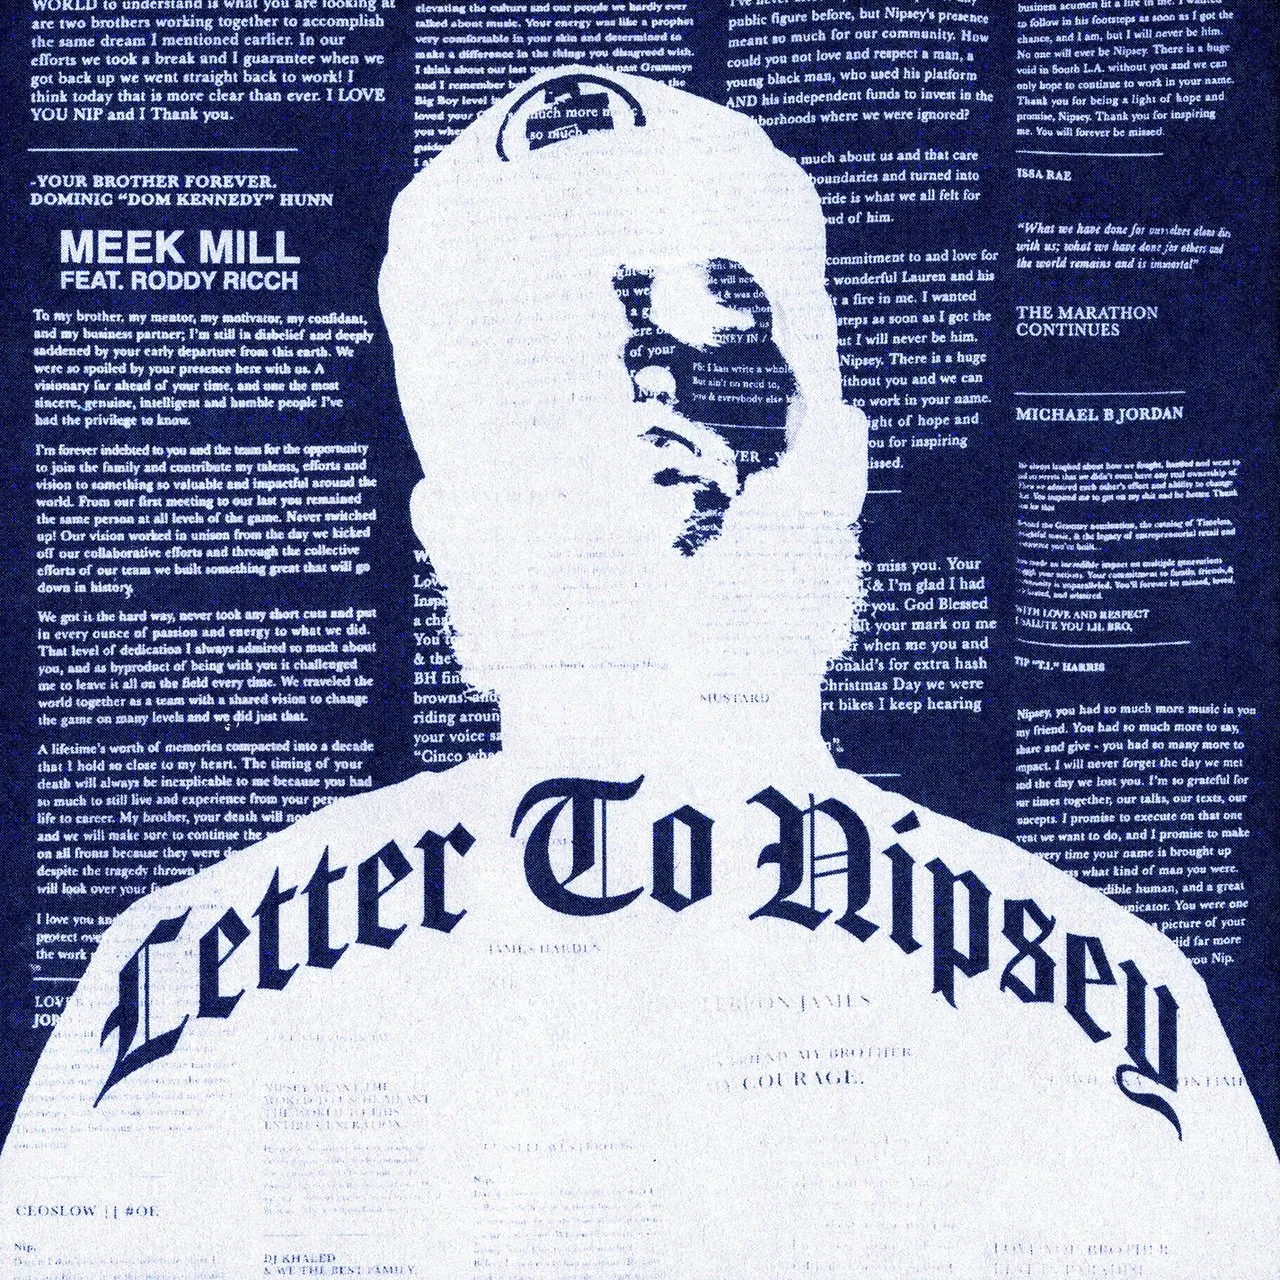 Meek Mill Ft. Roddy Ricch – Letter to Nipsey